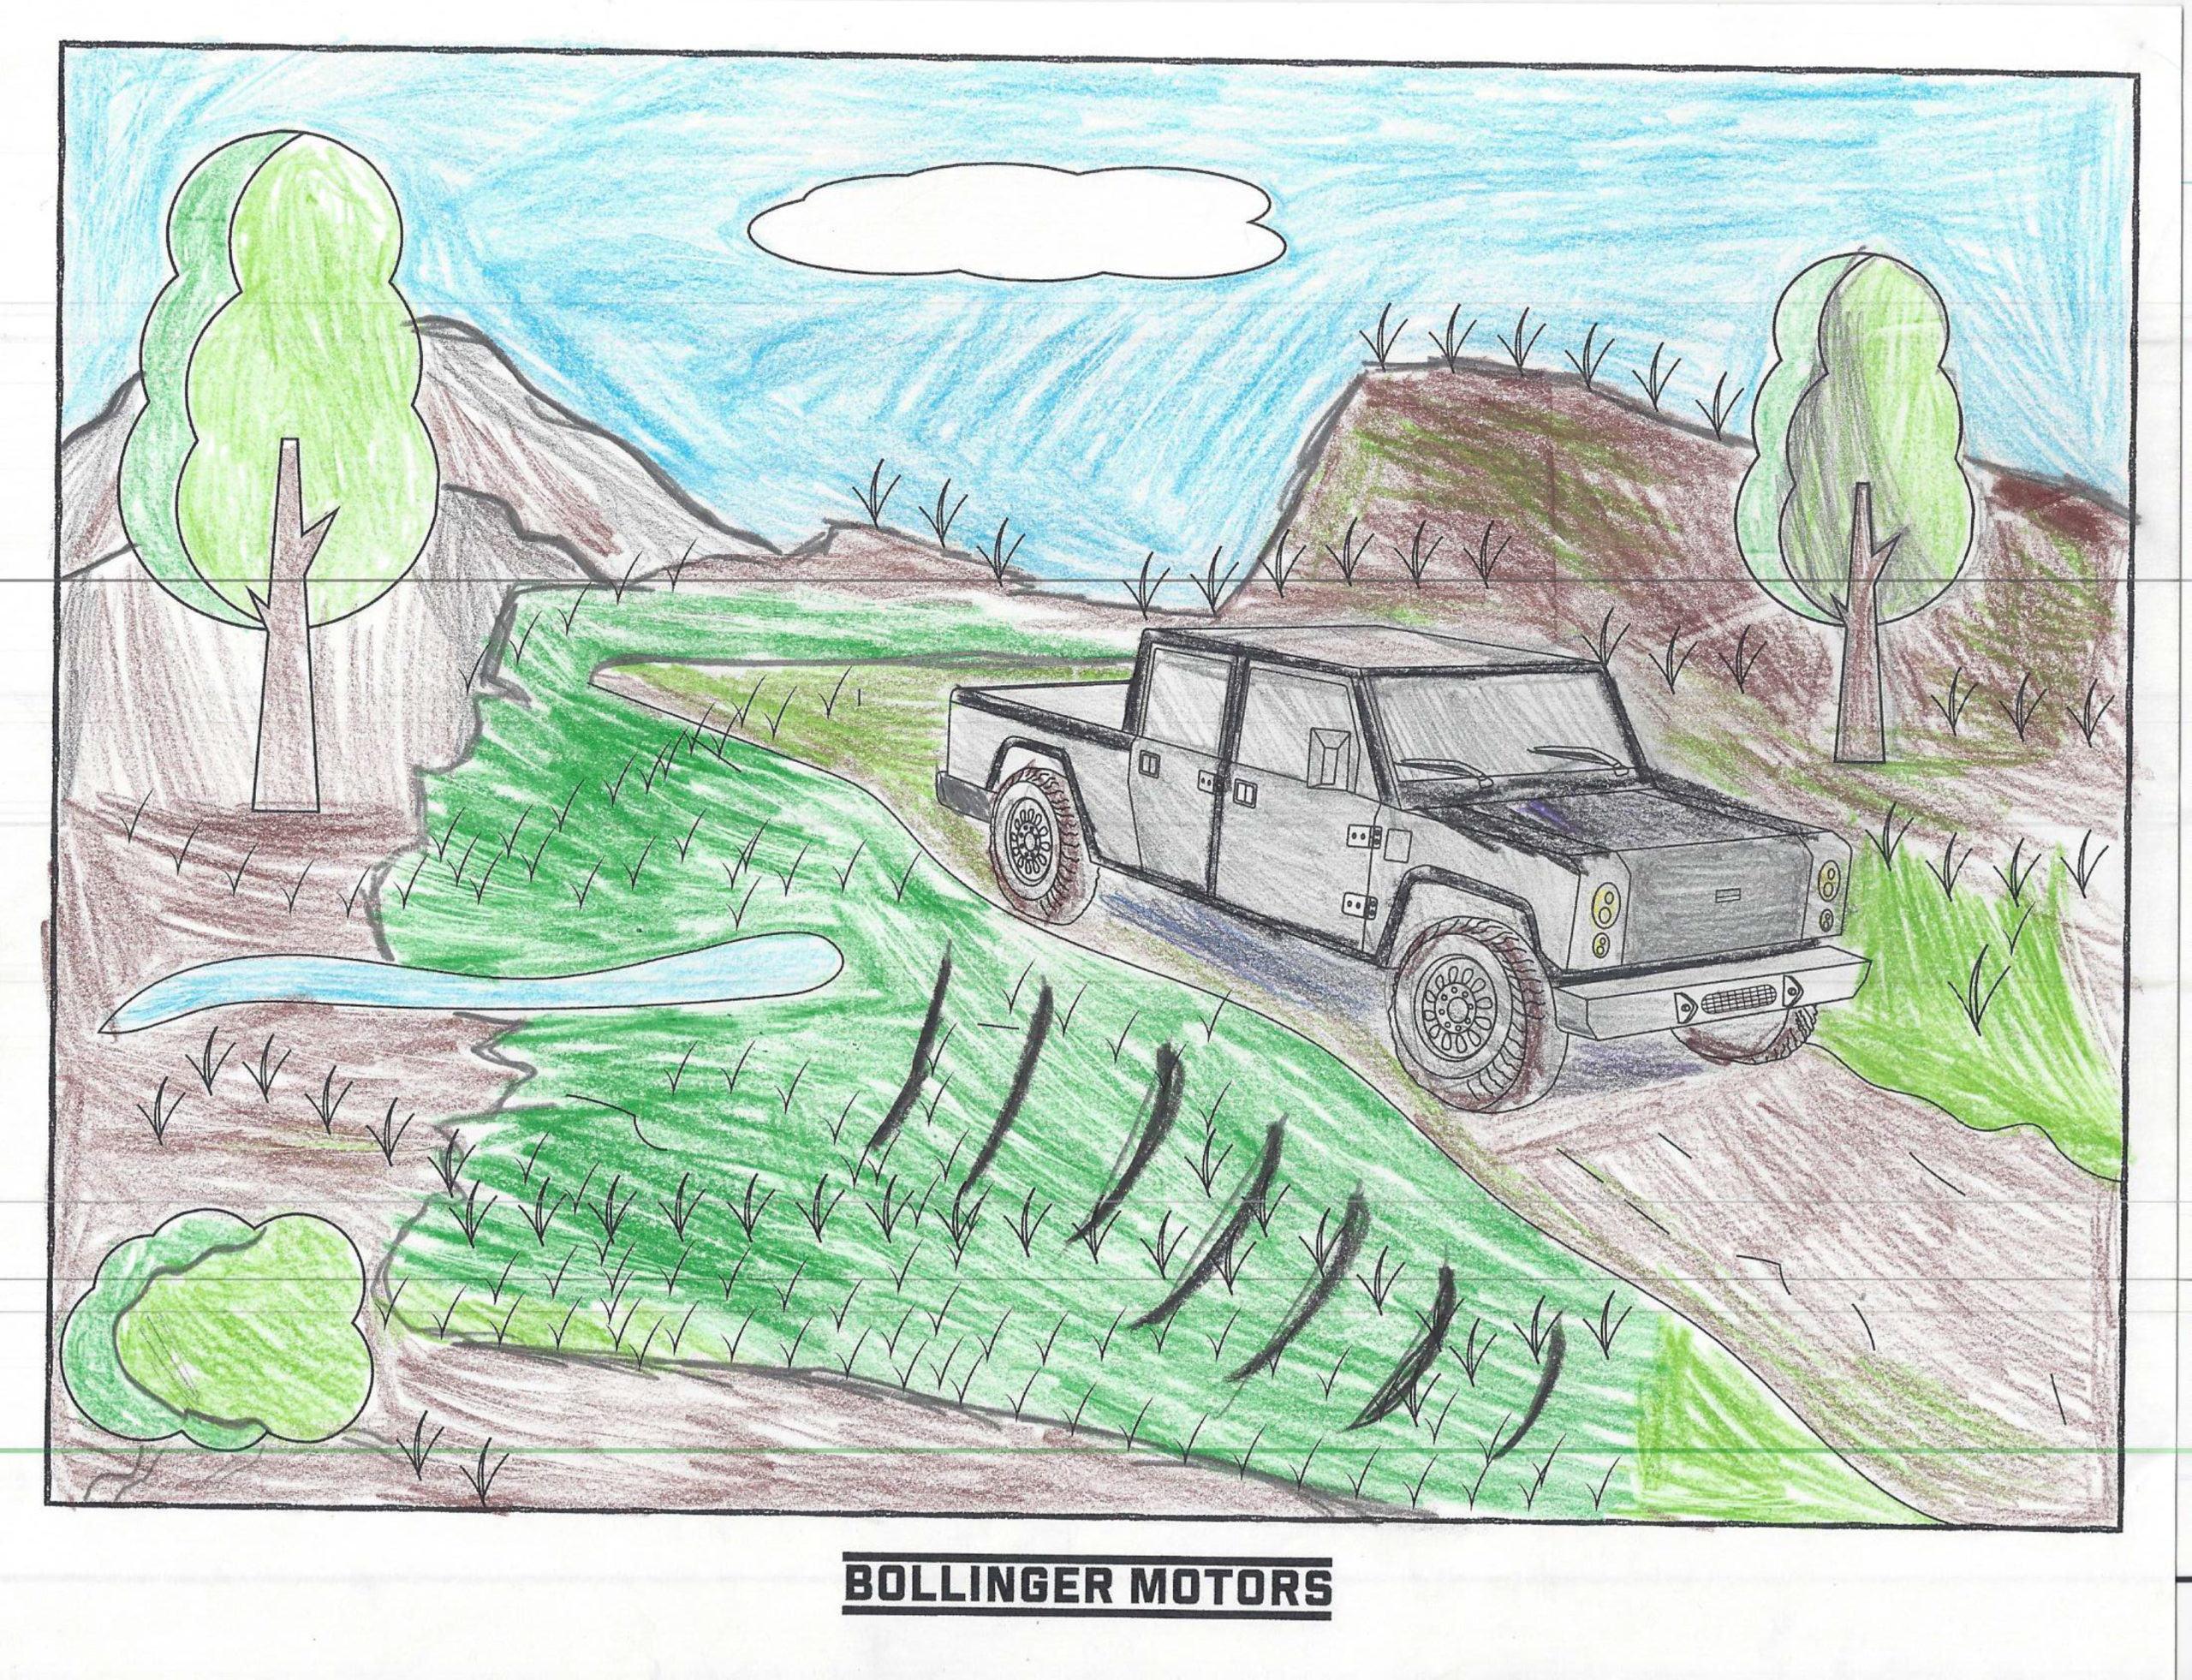 Children's coloring book submission of the B2 in grey in a colorful landscape